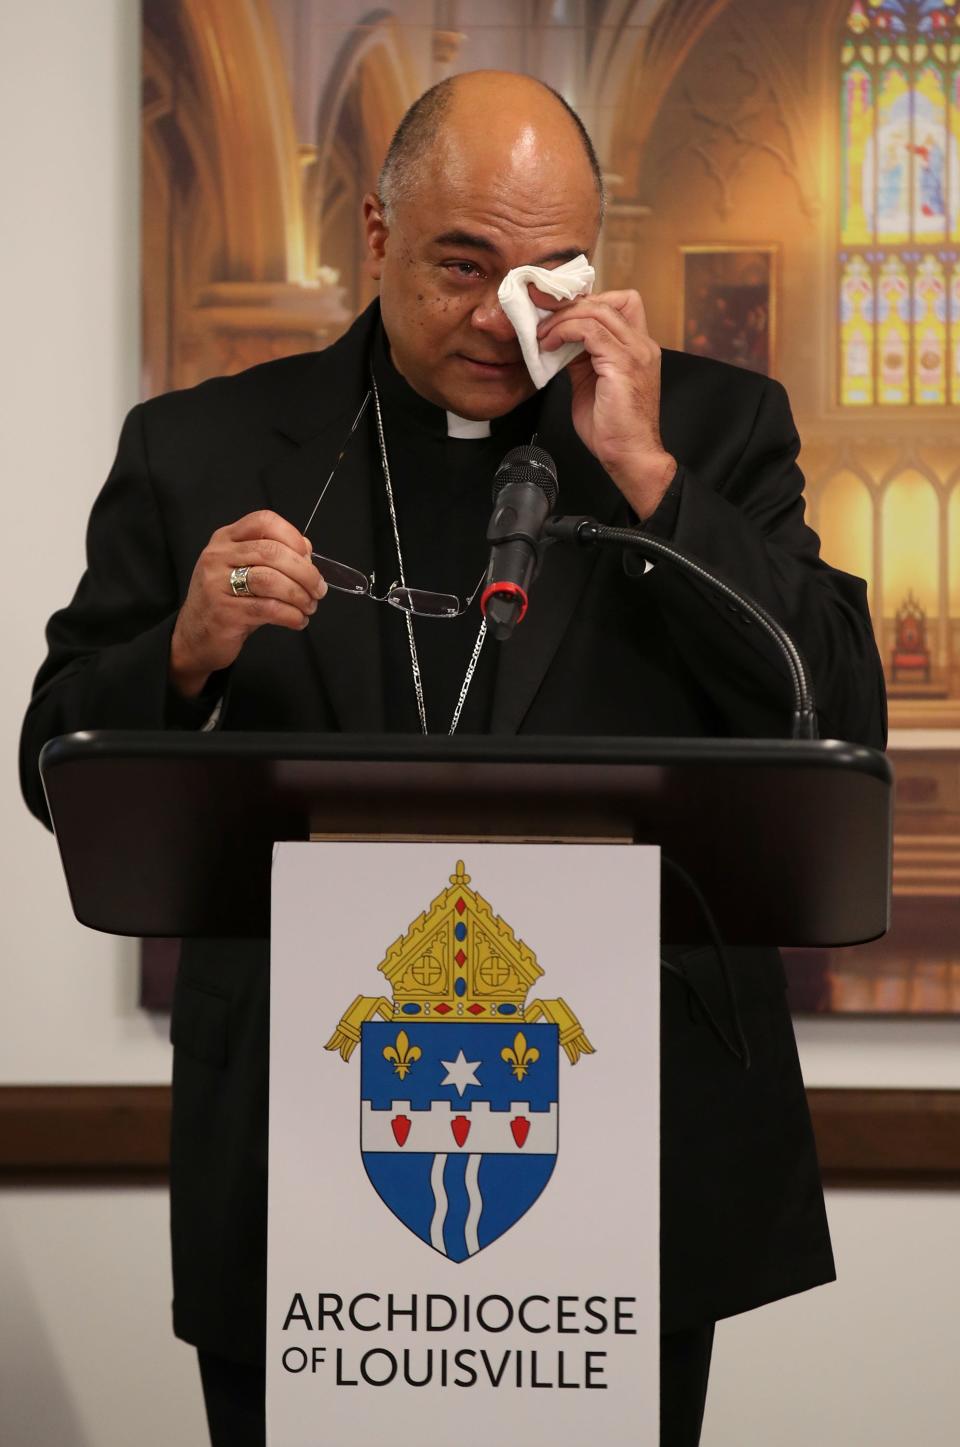 Archbishop Shelton Fabre makes pauses during remarks as he is introduced as the Archbishop of Louisville.  Fabre was remembering the people of Louisiana who he served before coming to Louisville.